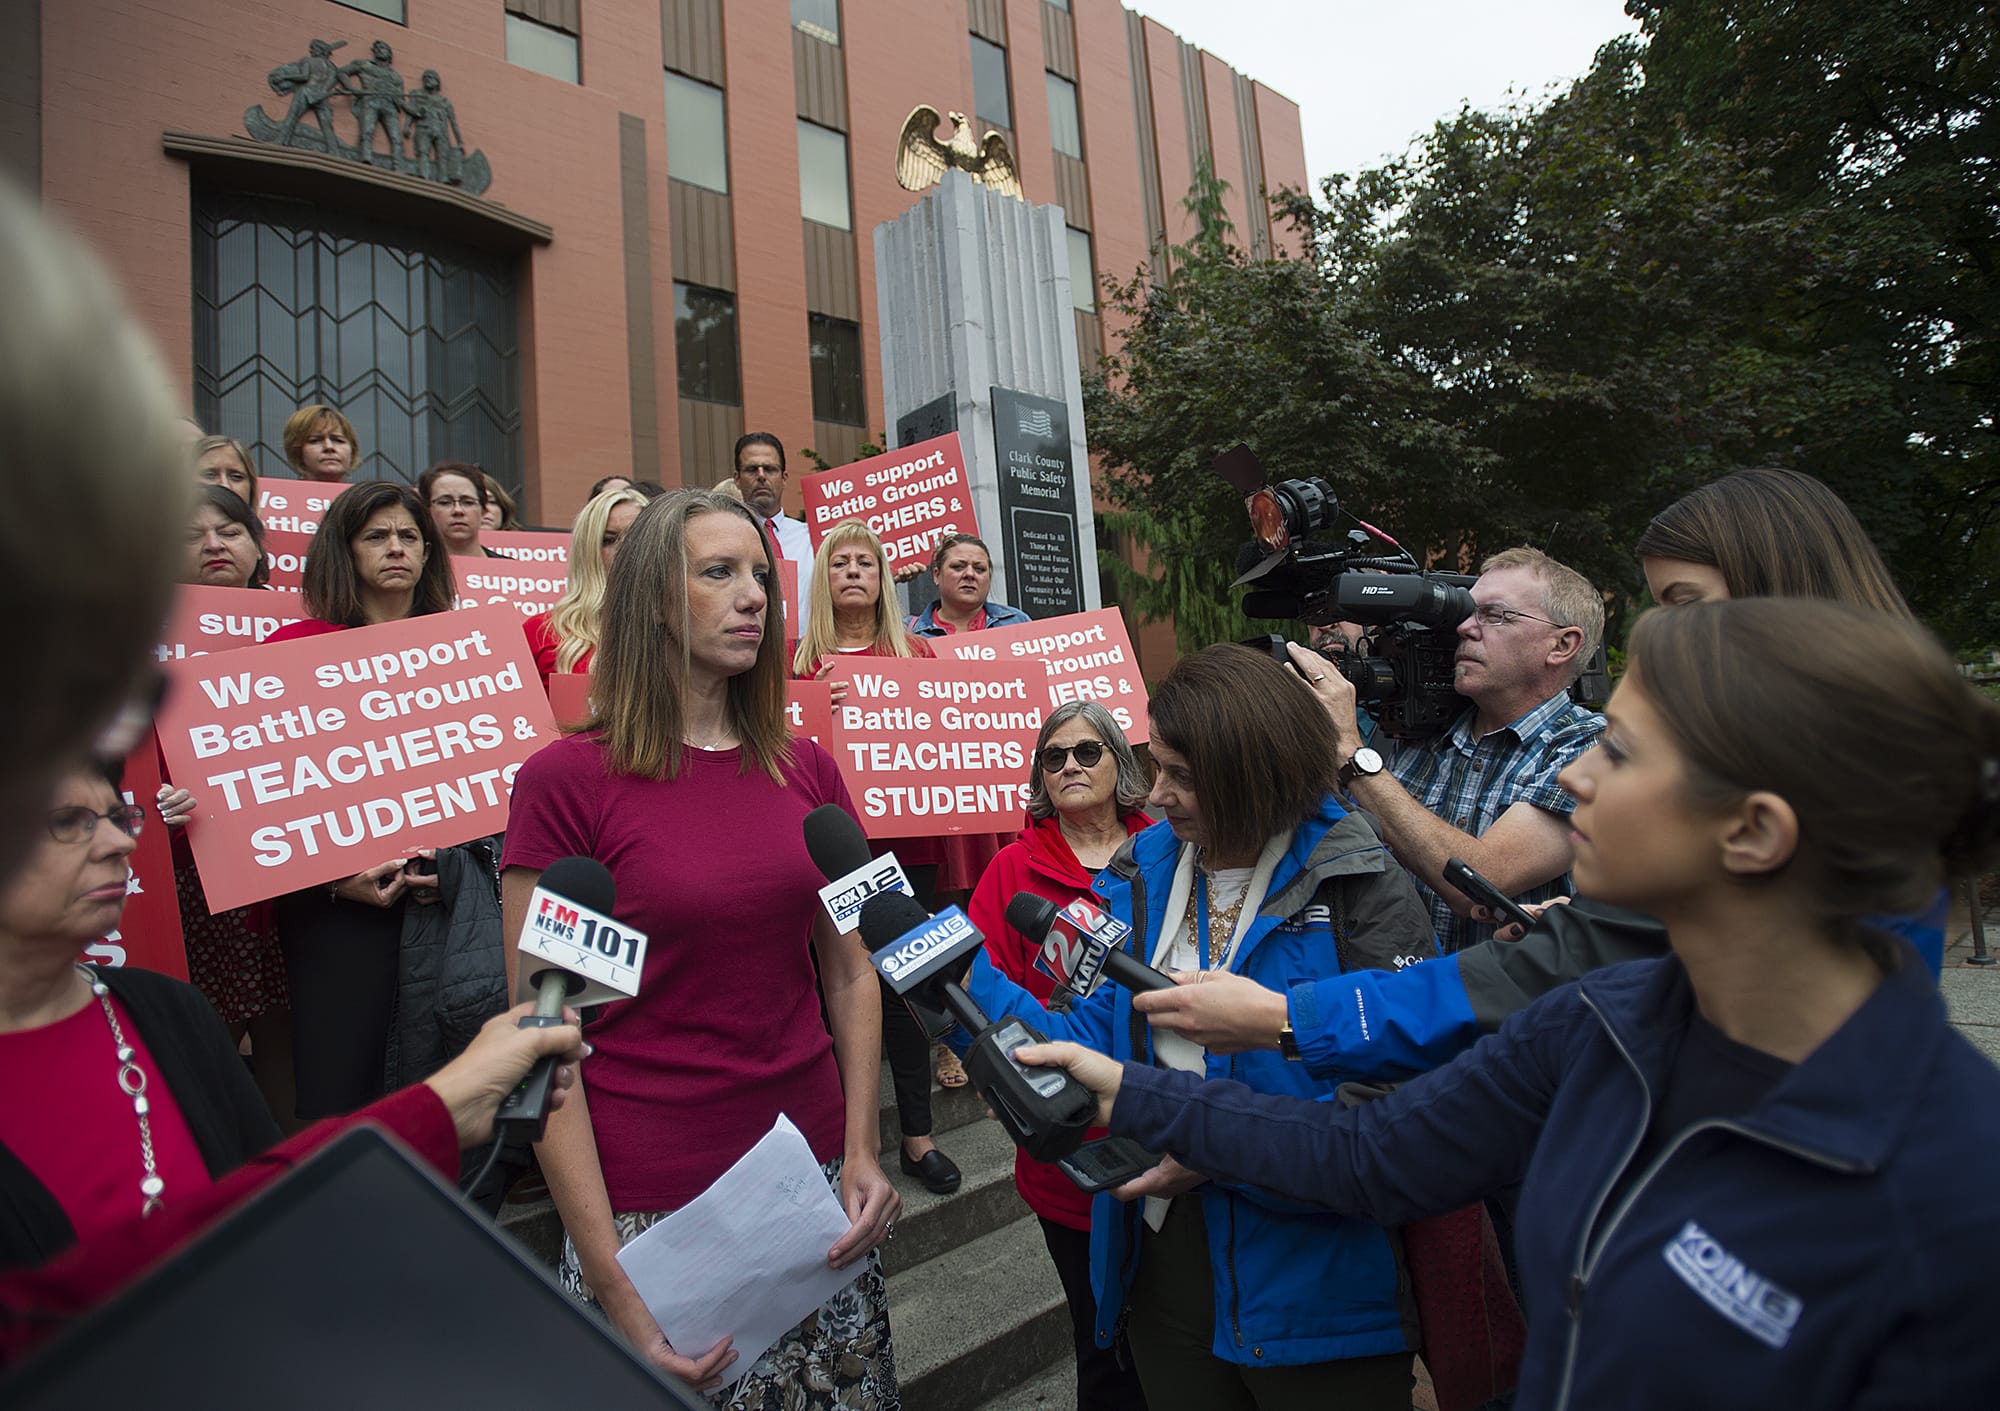 Marina Heinz, a fourth-grade teacher and vice-president of the Battle Ground Education Association, speaks to the media on the steps of the Clark County Courthouse before the injunction ruling Friday morning, Sept. 14, 2018.